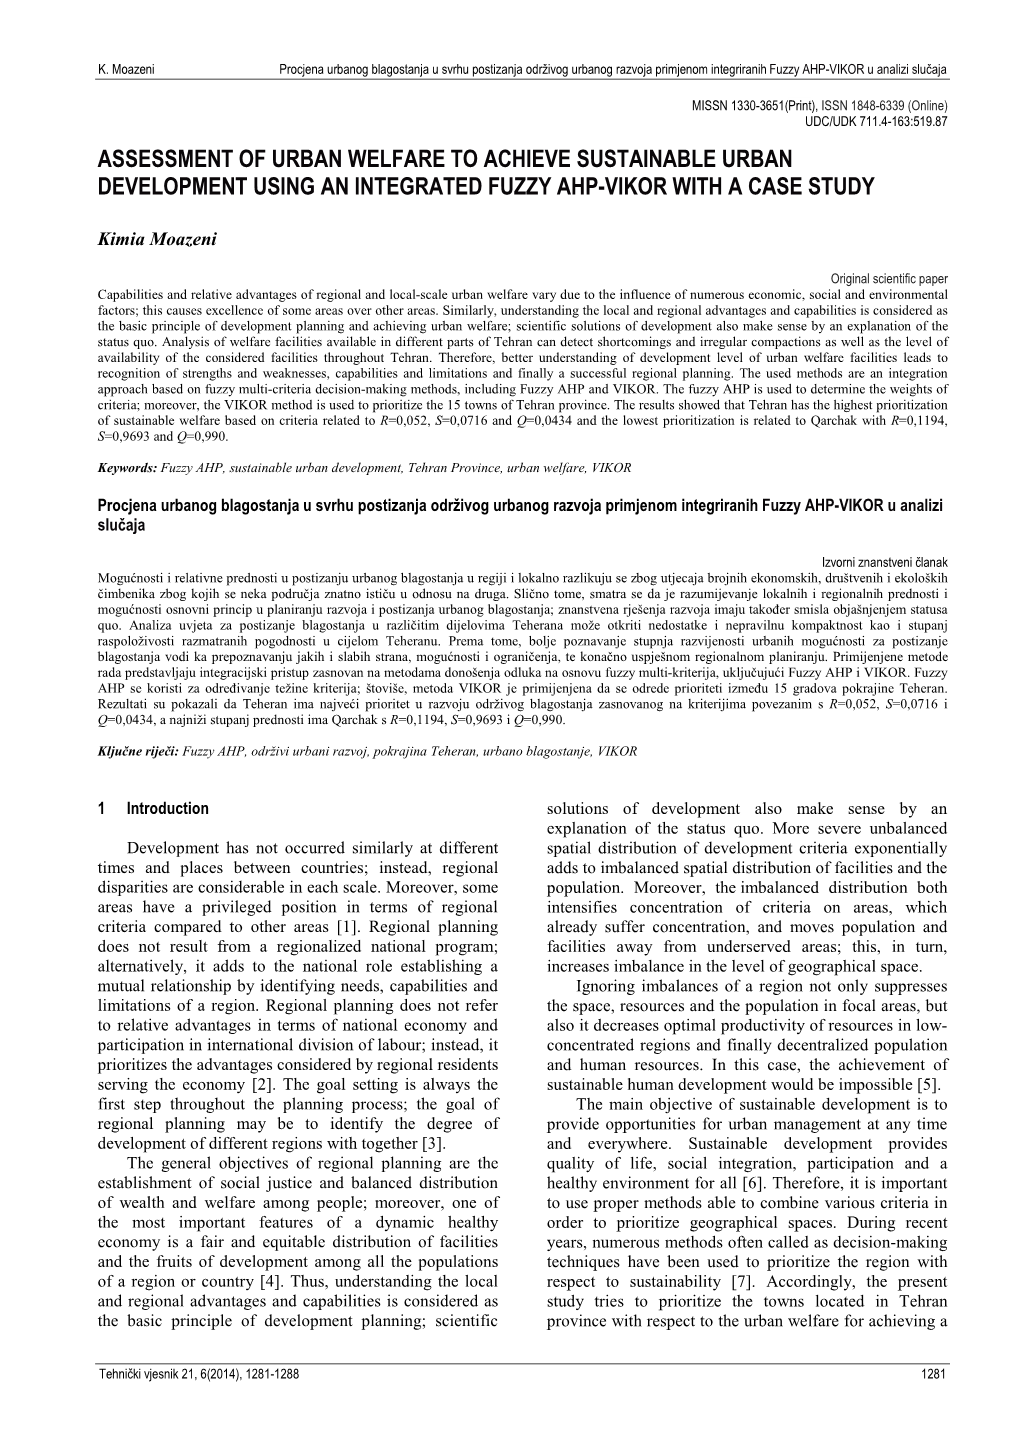 Assessment of Urban Welfare to Achieve Sustainable Urban Development Using an Integrated Fuzzy Ahp-Vikor with a Case Study